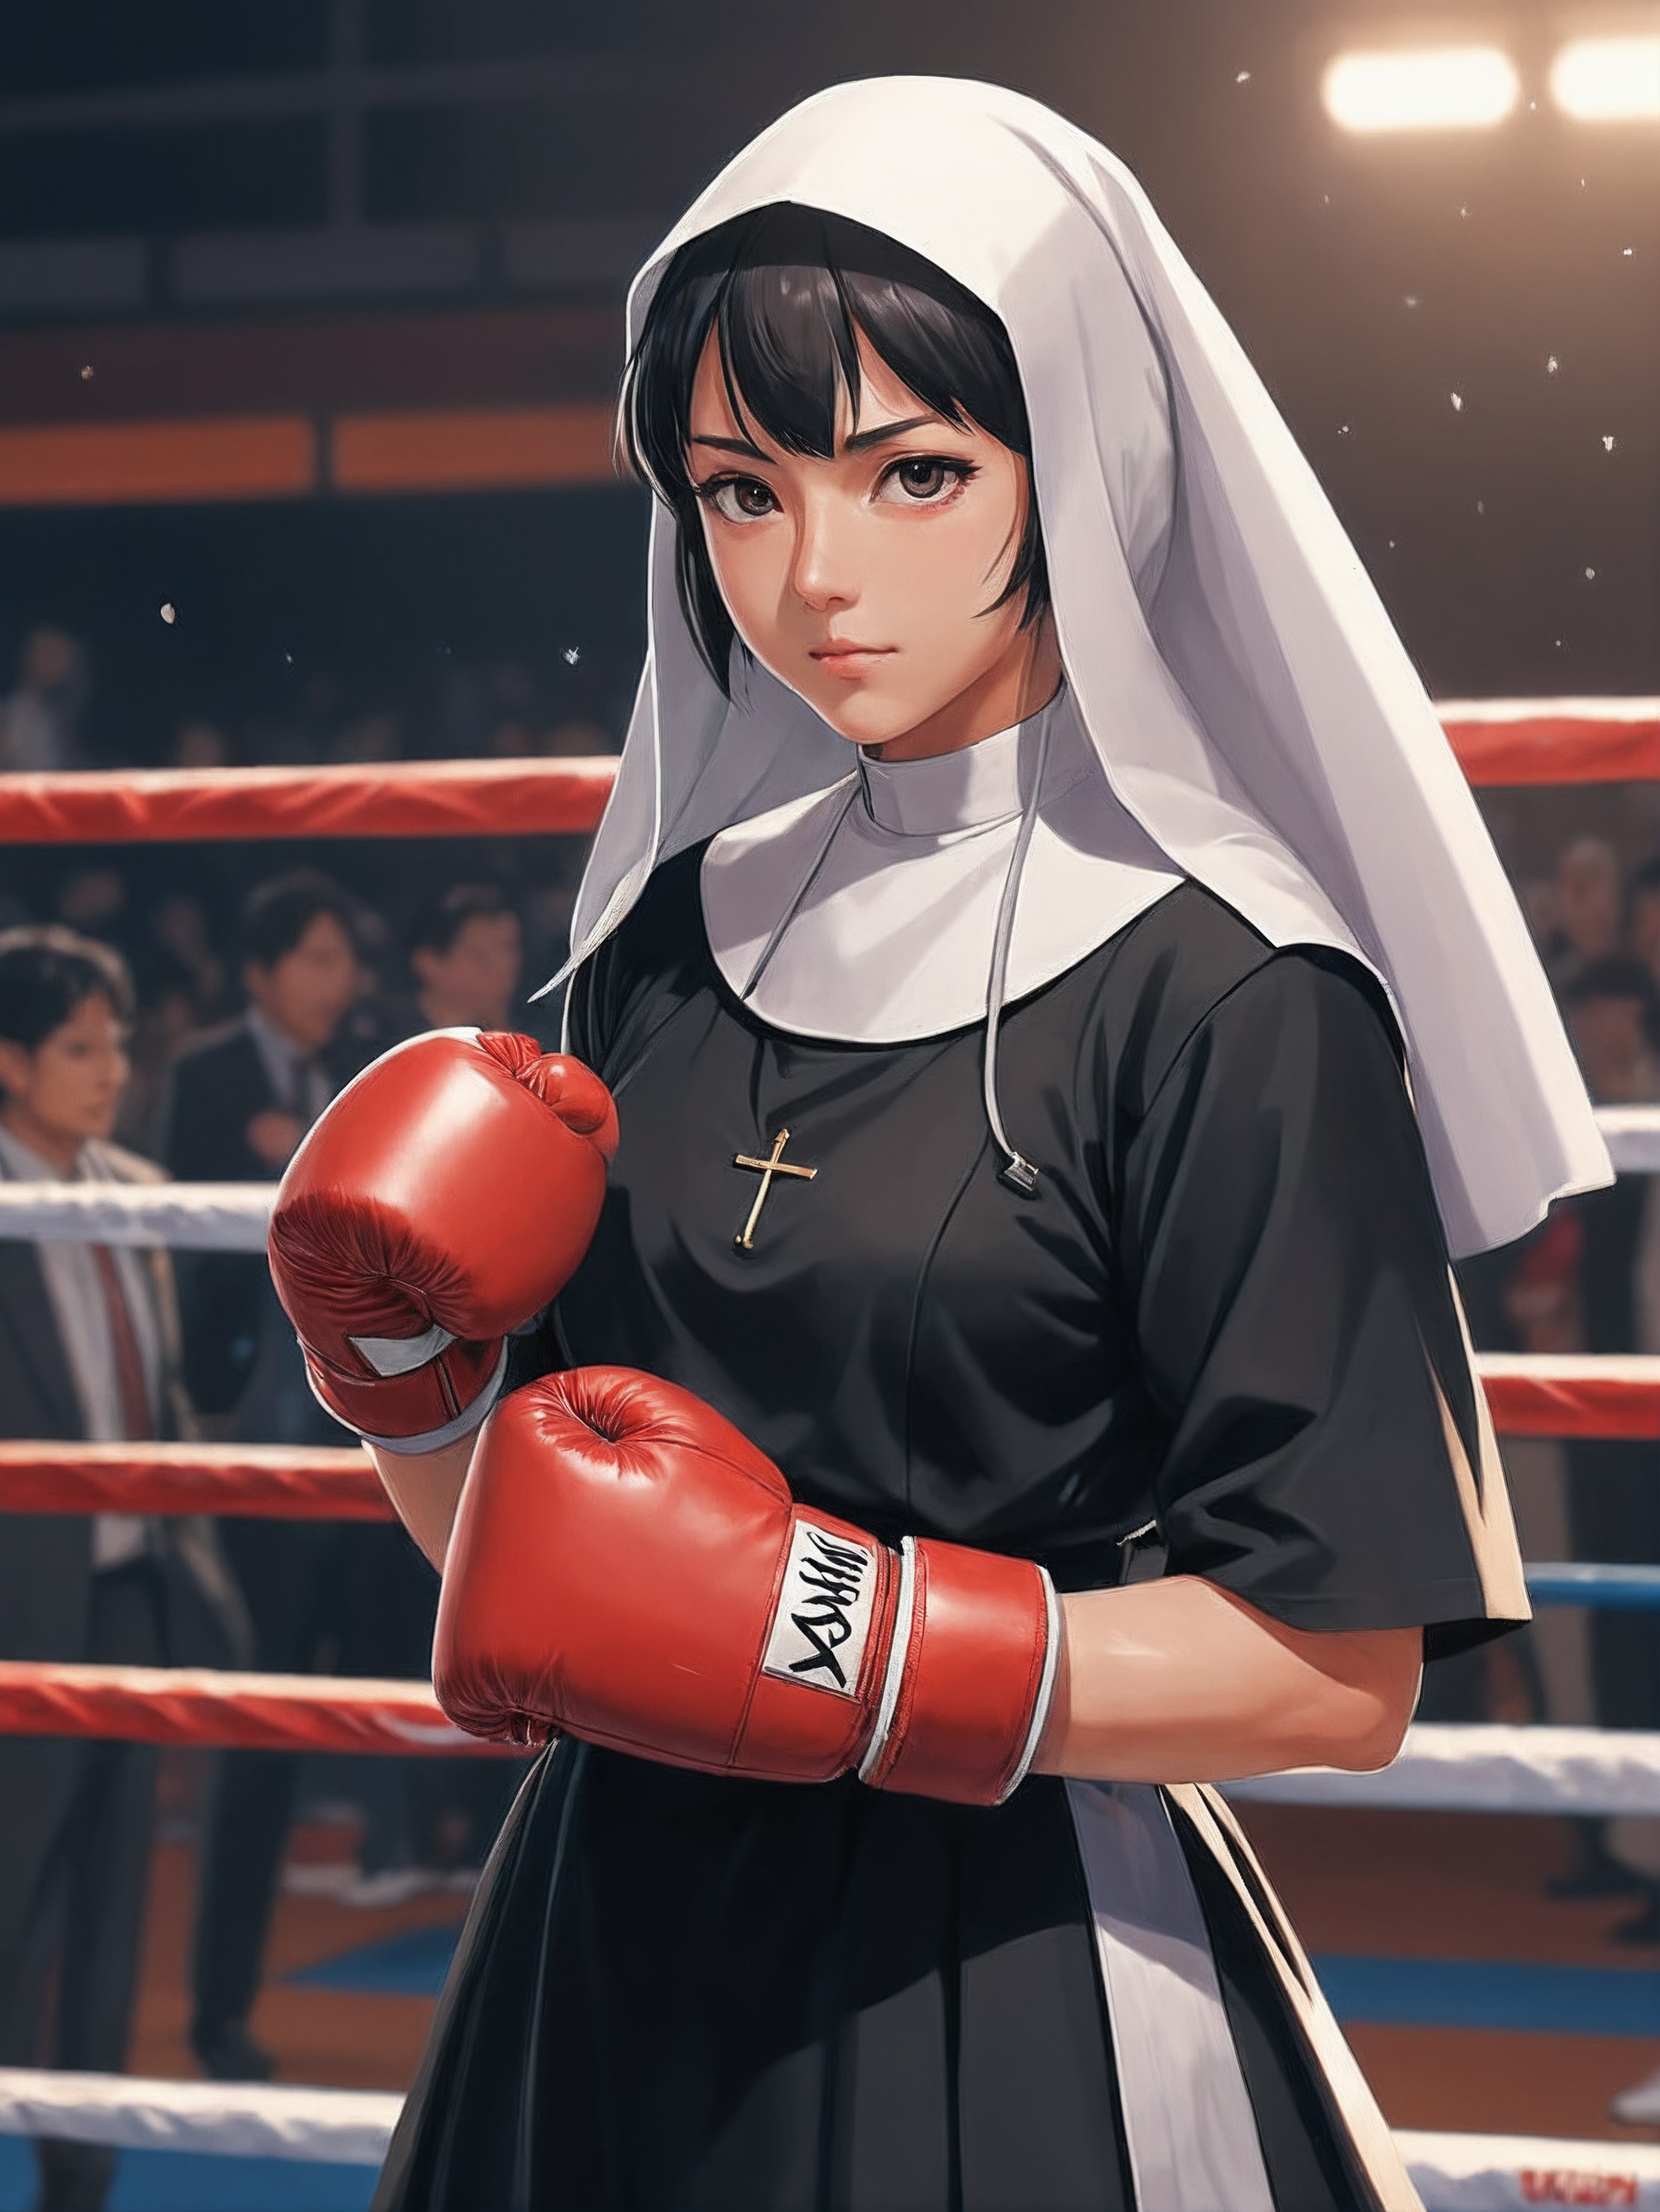 ((Painted Anime)), (boxing nun), art by atey ghailan, painterly anime style at pixiv, art by kantoku, in art style of redj...